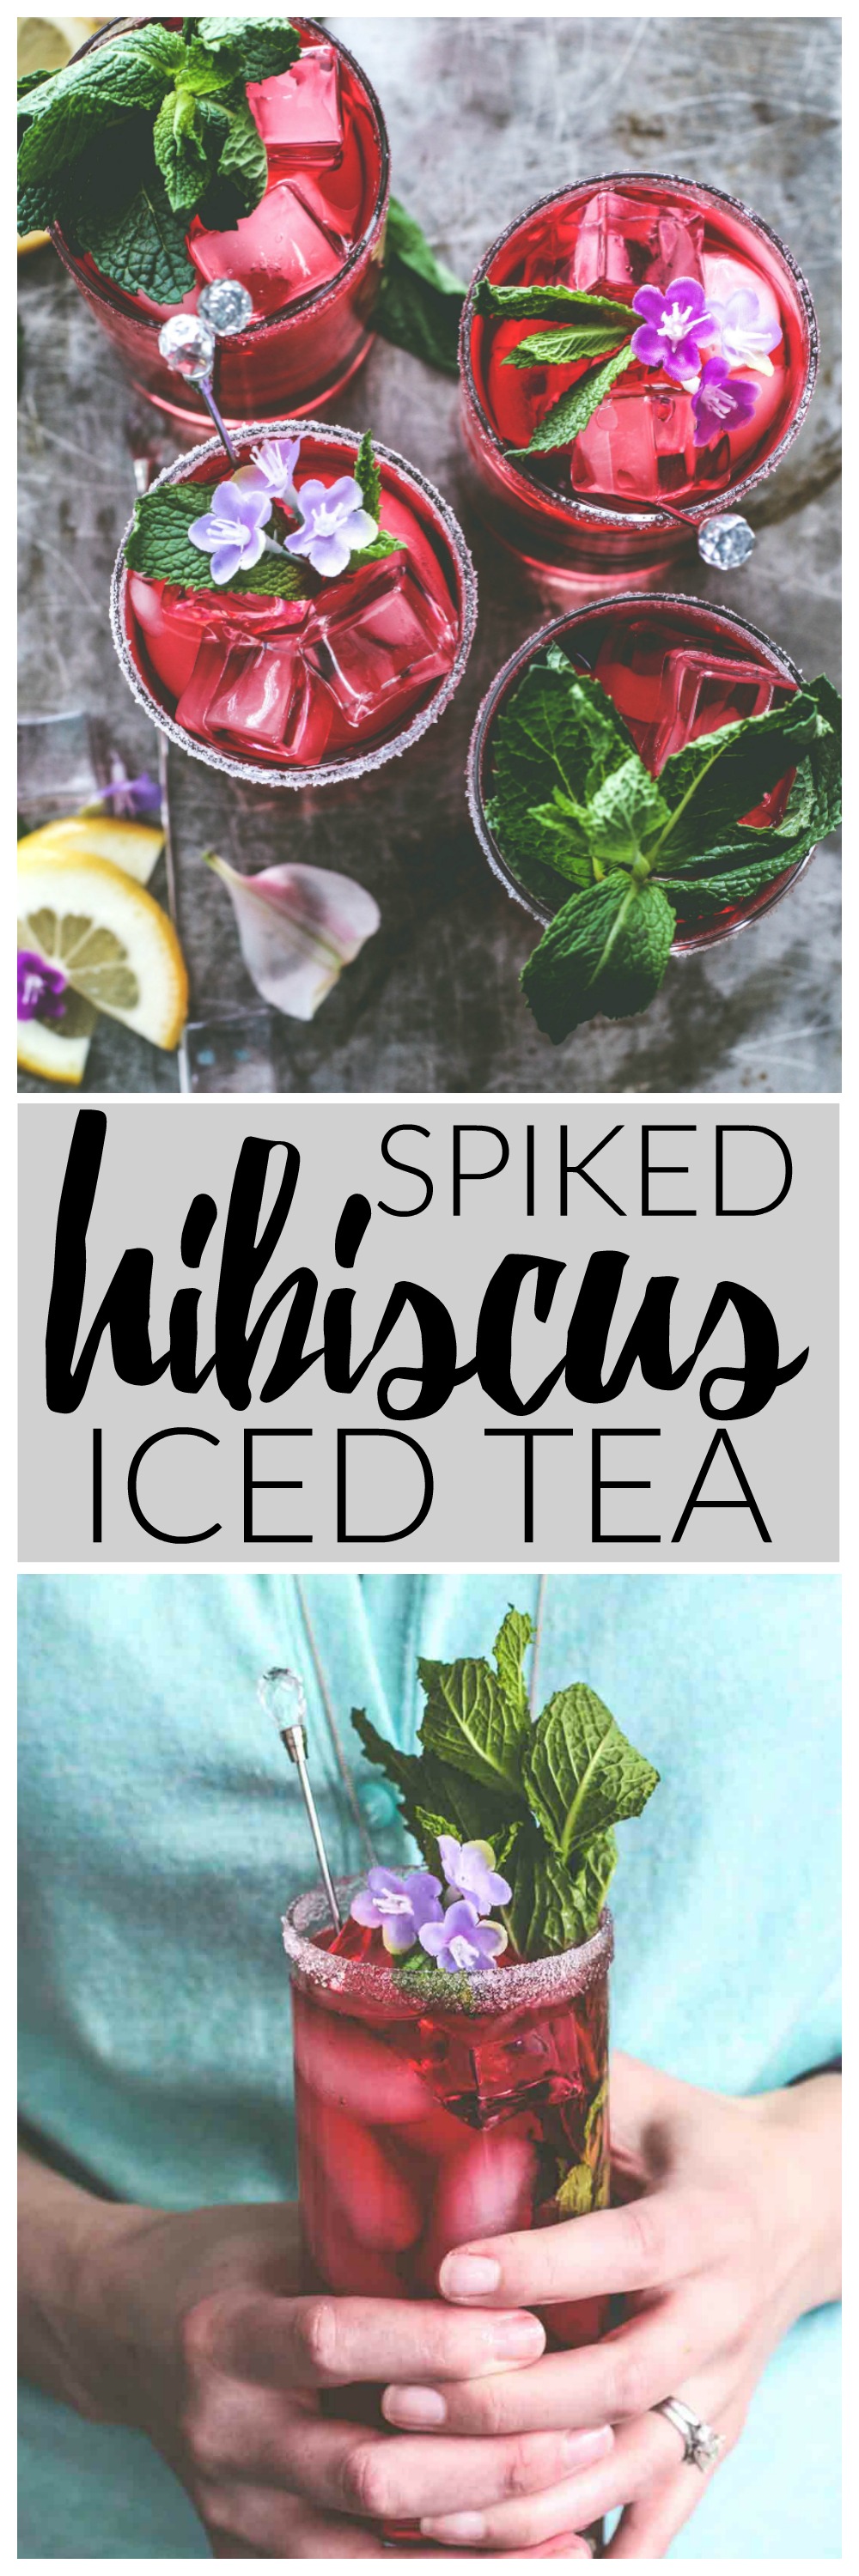 Spiked Hibiscus Iced Tea | Killing Thyme — this ruby-hued drink mixes blueberry vodka with hibiscus iced tea and a lemony simply syrup for a refreshing and not-too-sweet summer bev.